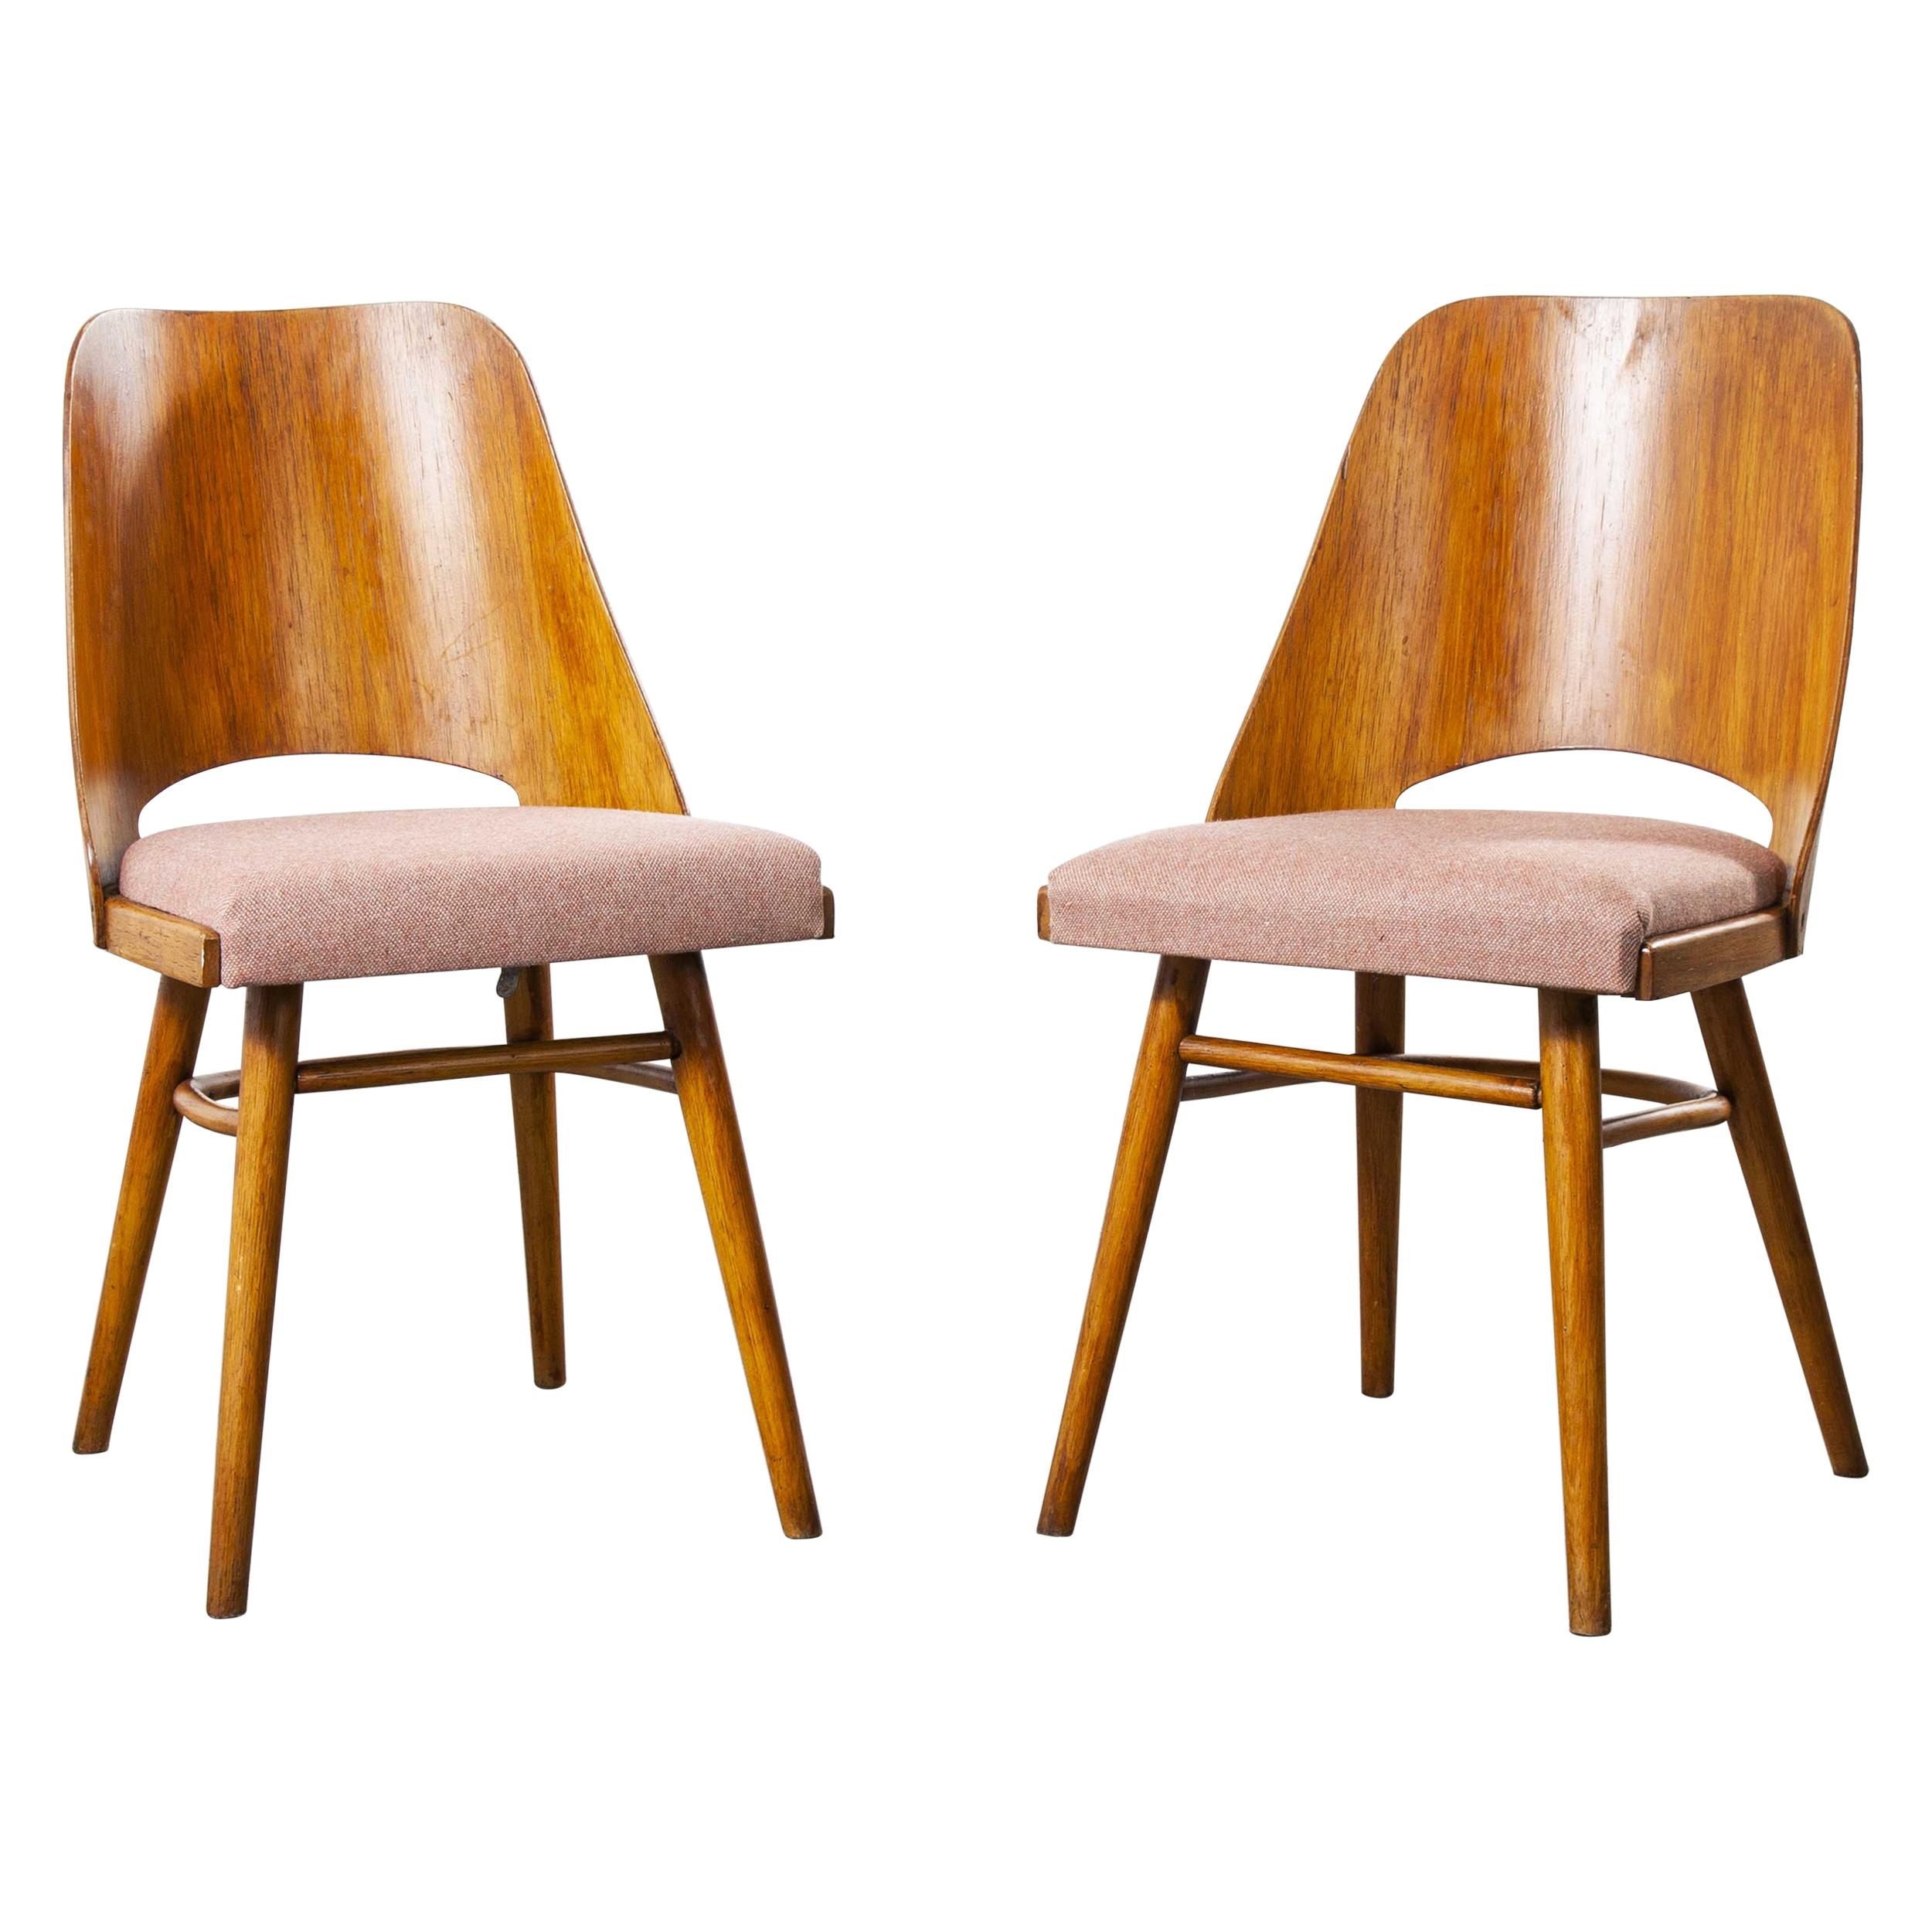 1950s Ton Upholstered Dining Chairs by Radomir Hoffman, Pair